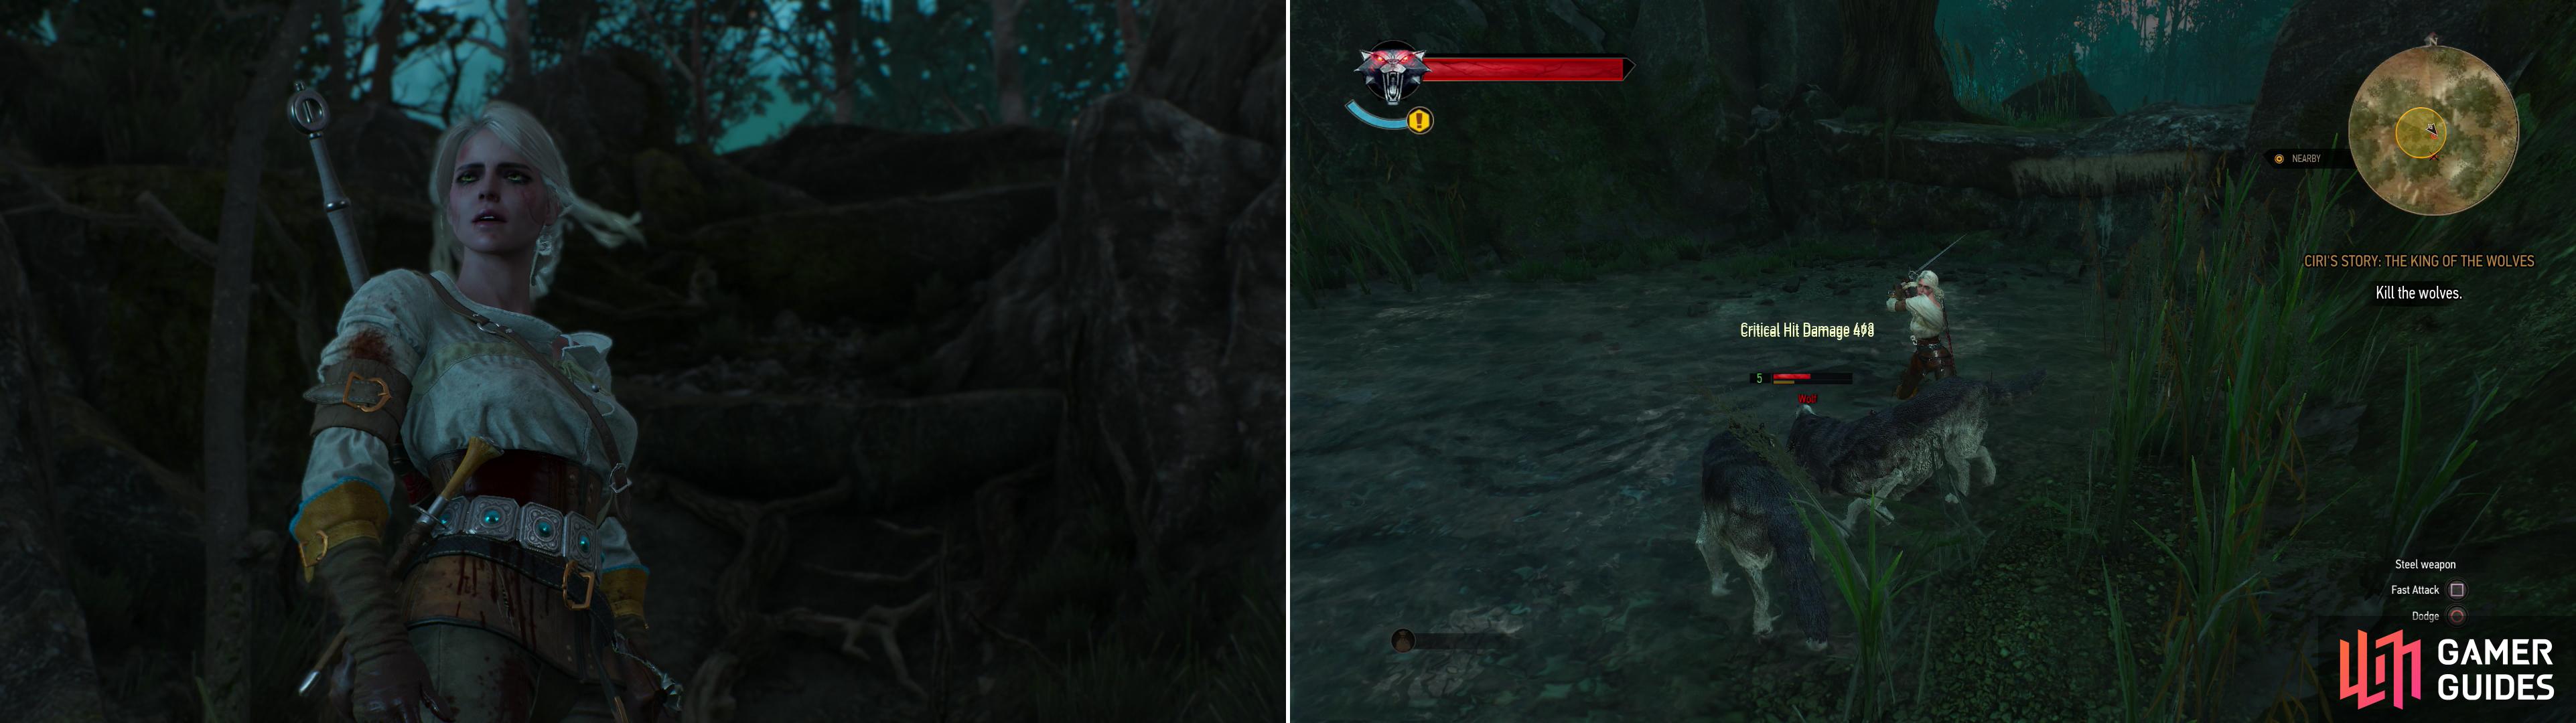 The Baron's retelling of Ciri's story is played out in gameplay, with you controlling Ciri (left). Dispatch some wolves - the beasts prowl these woods in number, and you'll have to dispatch several groups of them (right).